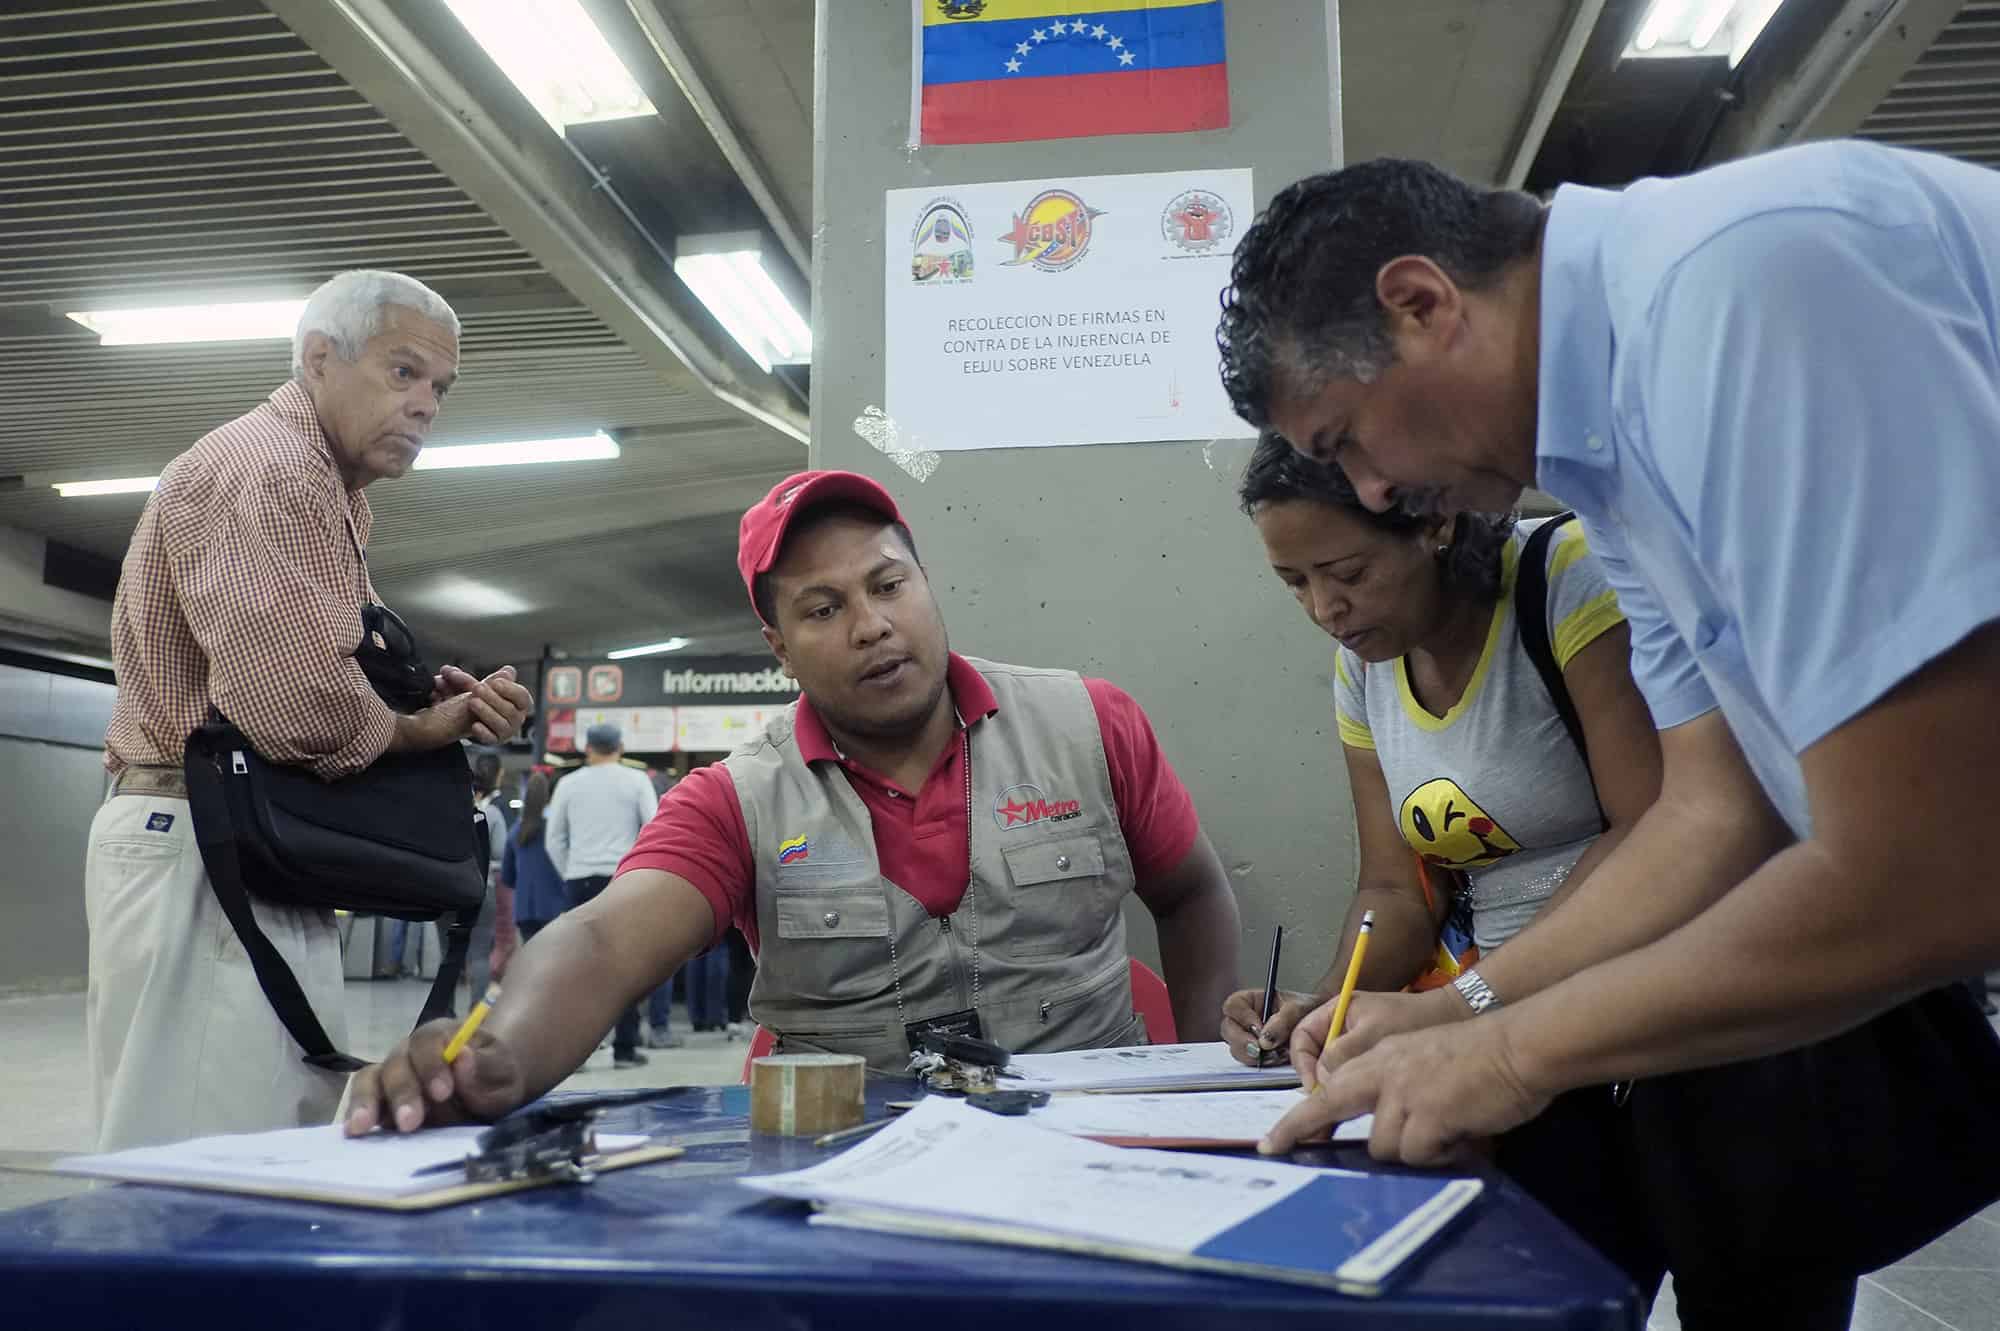 People sign documents in Caracas to show their support for the Venezuelan government after the U.S. imposed sanctions on Venezuelan officials, March 9, 2015.